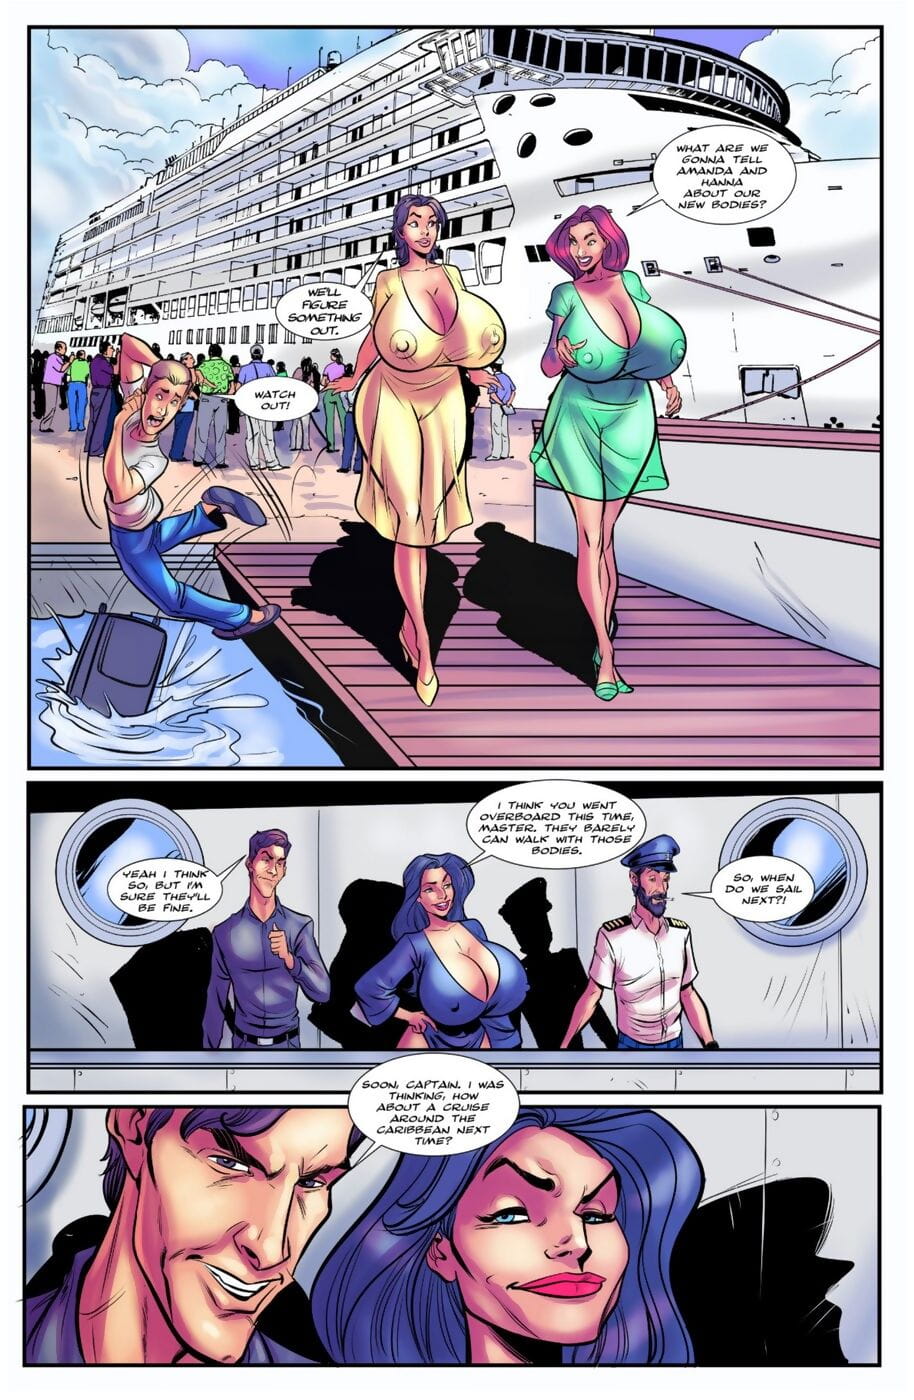 Bot- Cruise Controlled – Flipped Over Issue 2 page 1